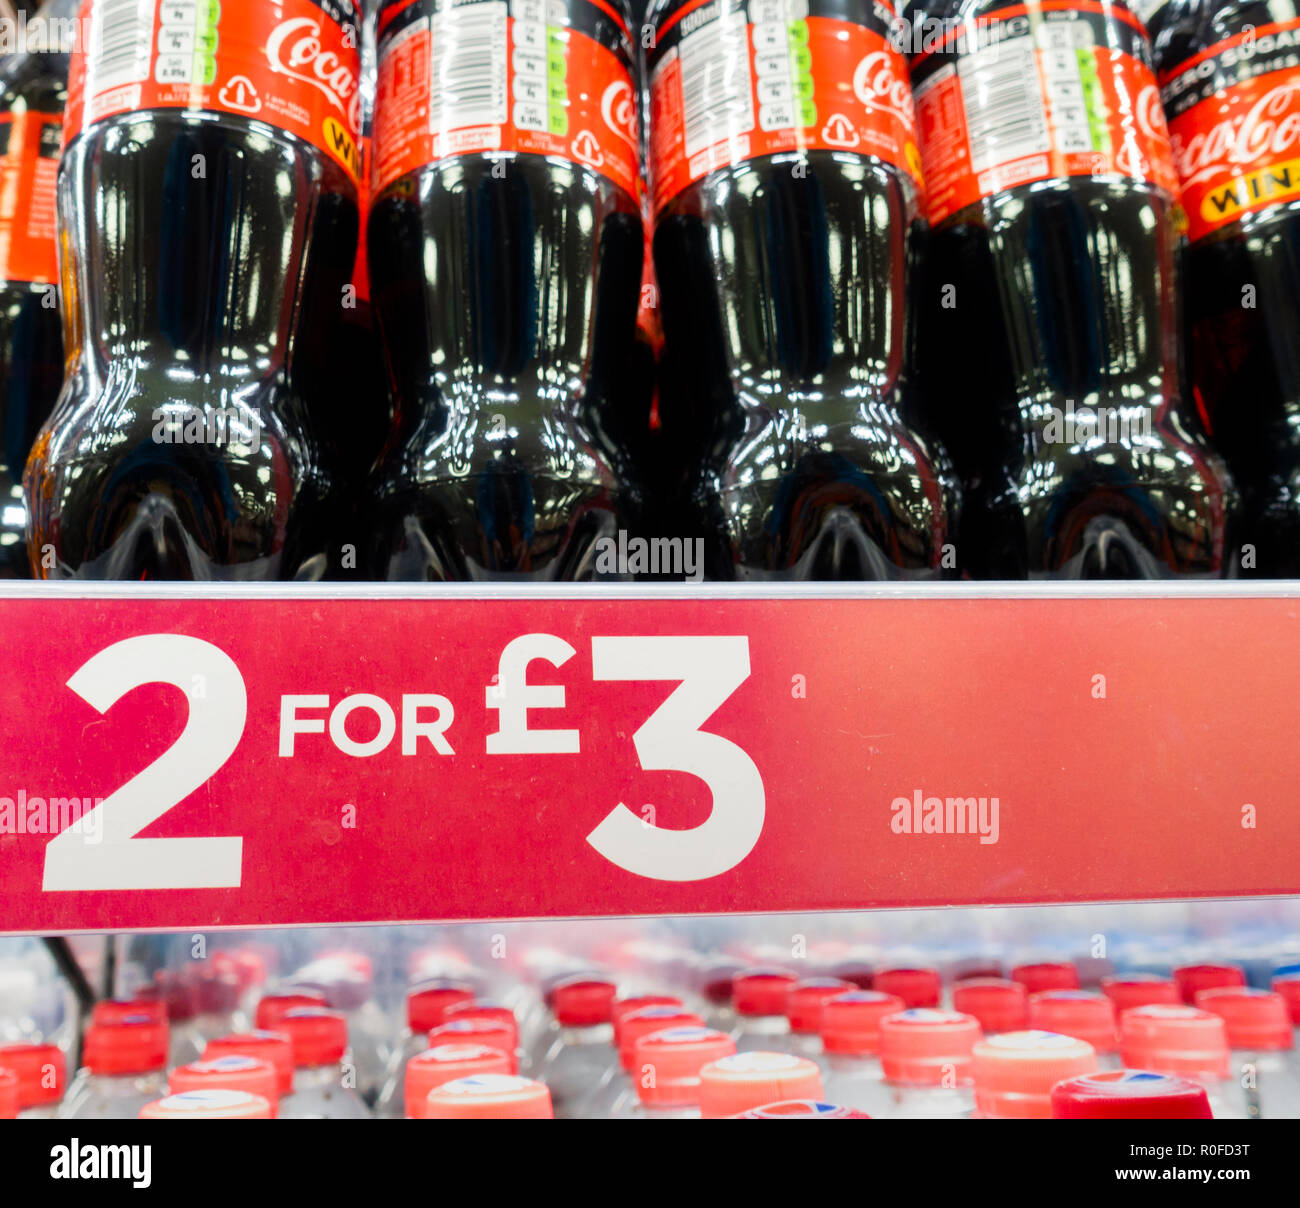 2 for 3 offer on sugary/fizzy drinks in UK shop. Stock Photo